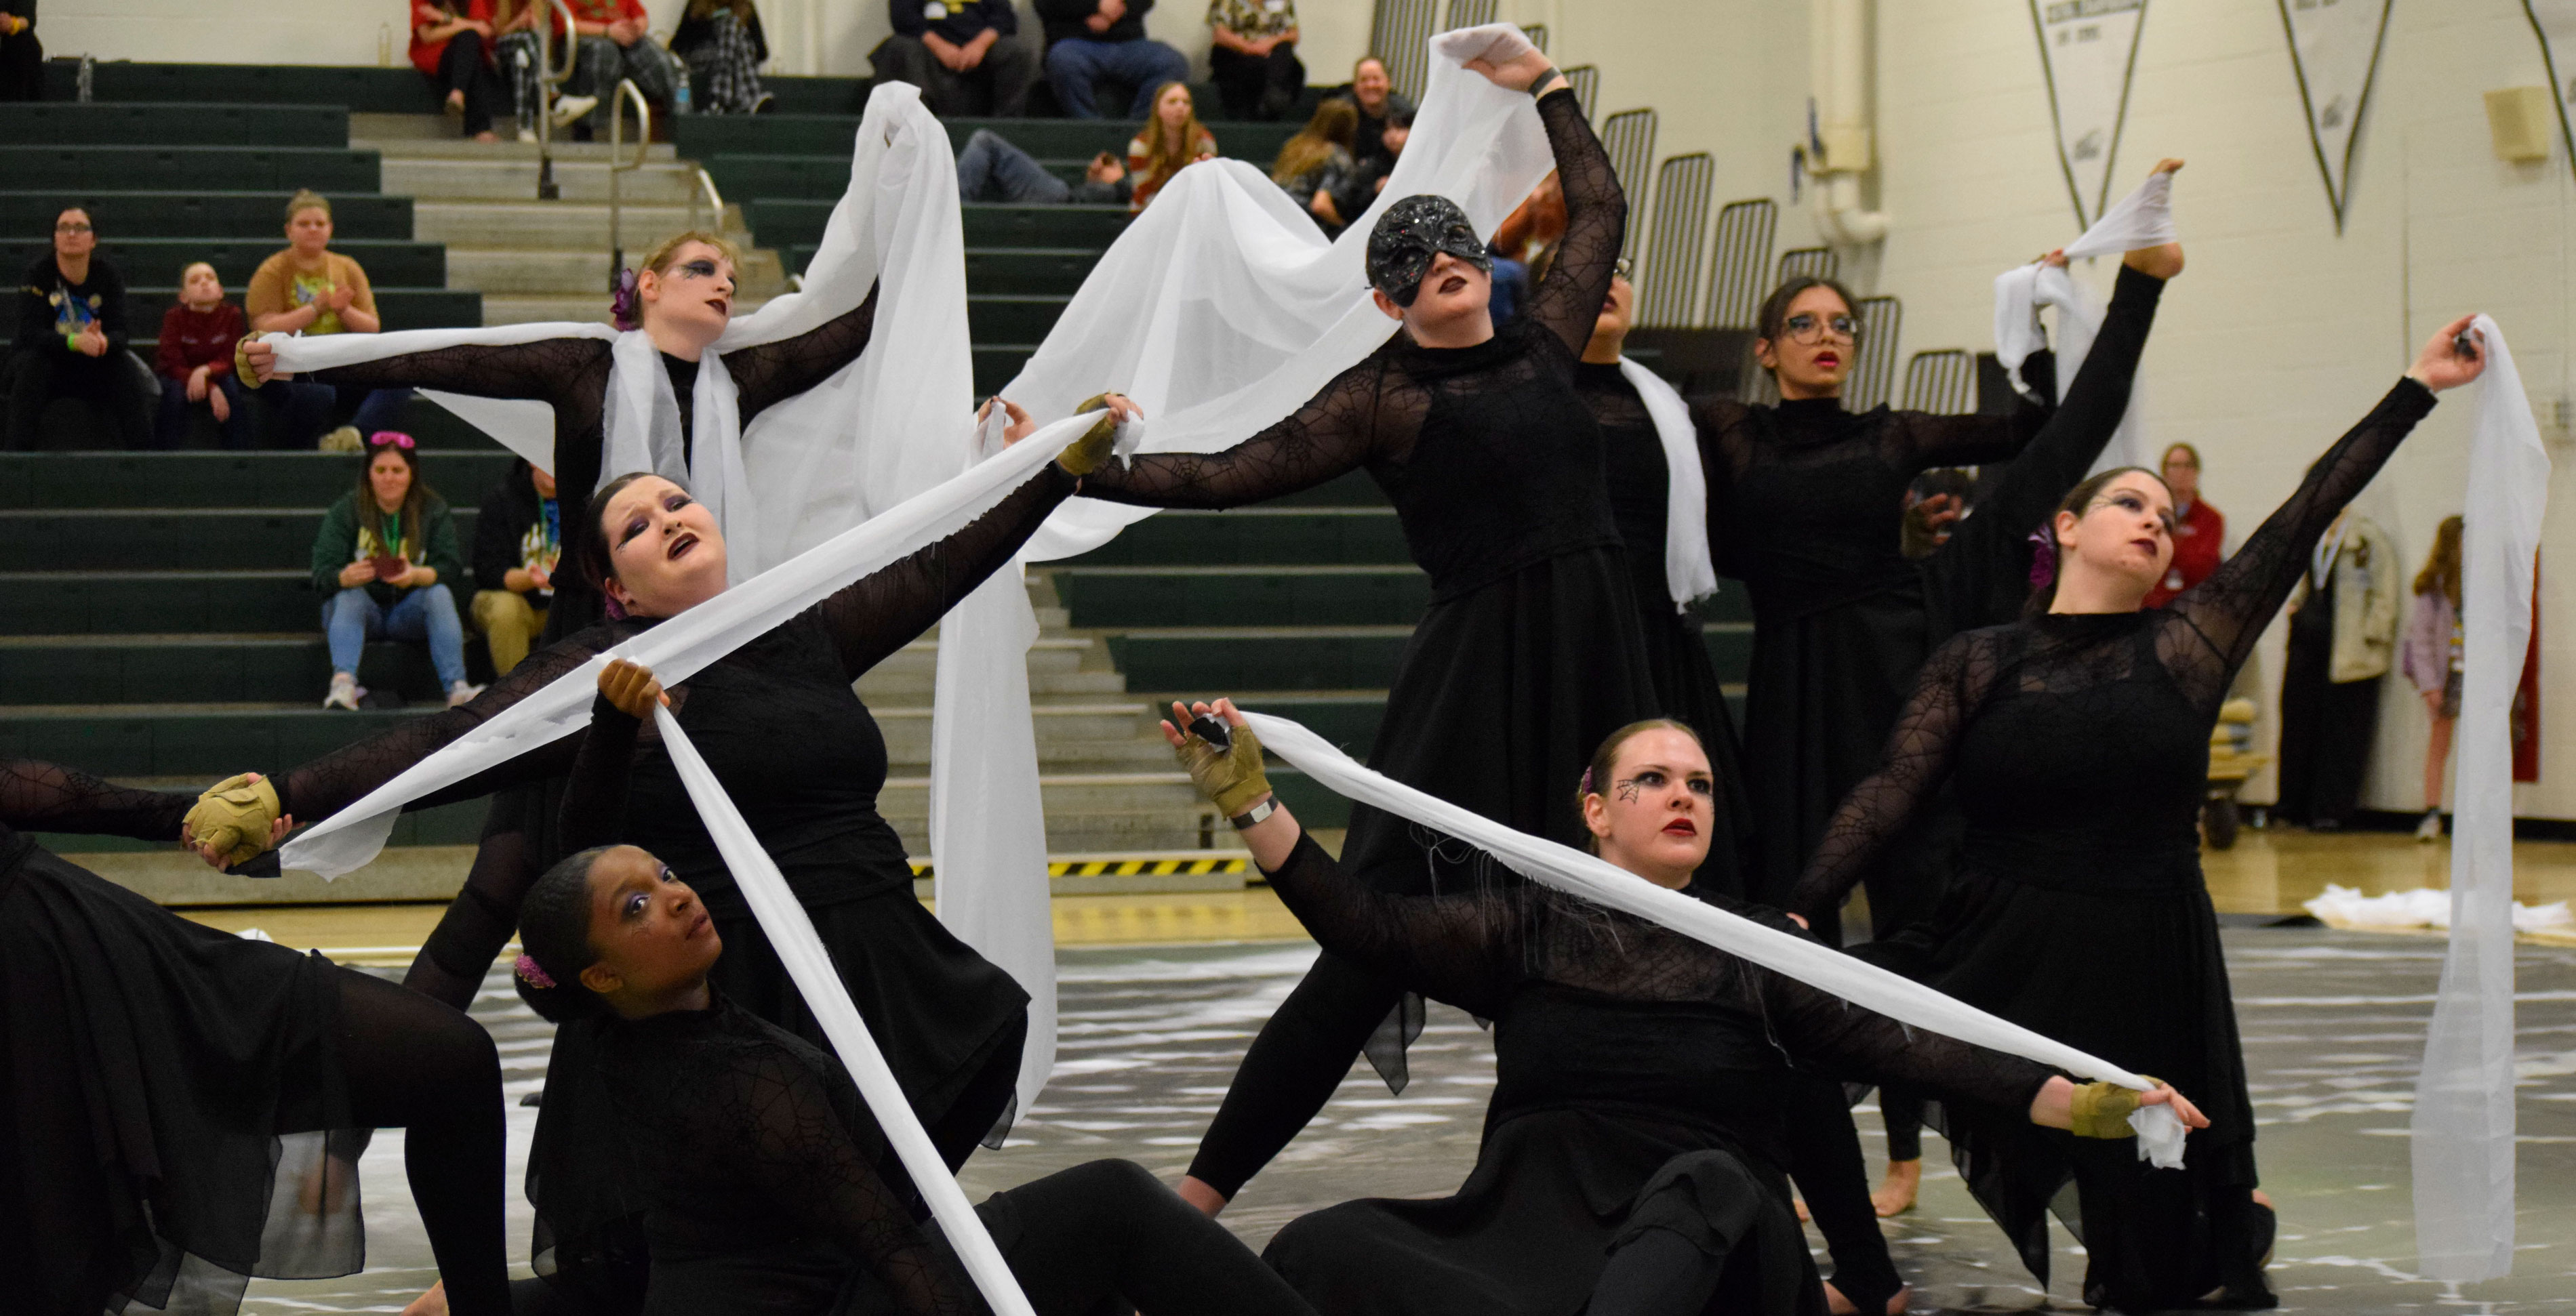 The UAlbany Winter Guard performs with all black costumes and lengths of white fabric inside a gymnasium.